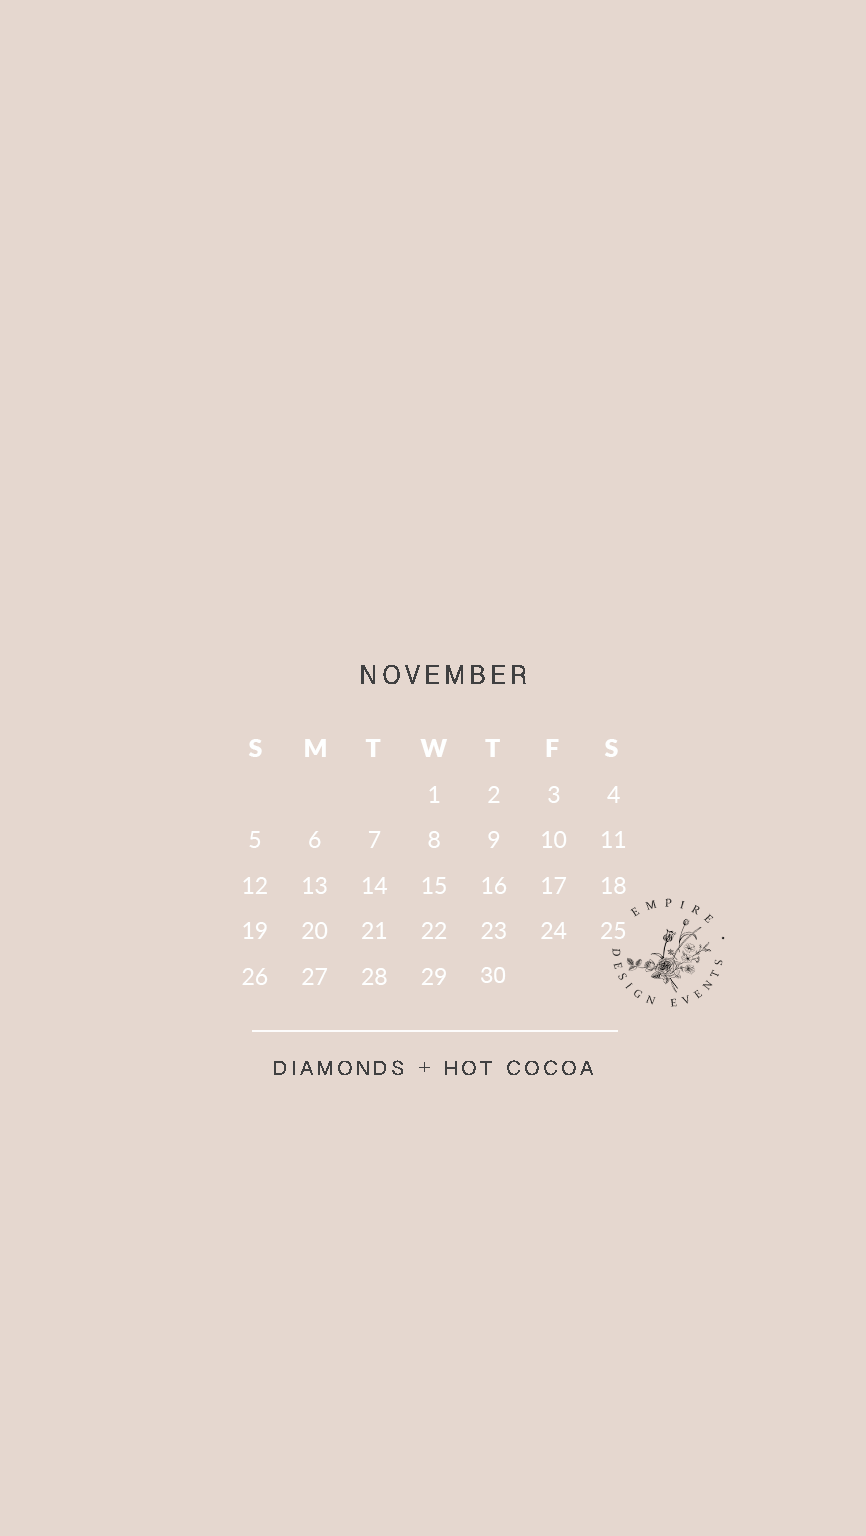 Style Your Phone Background For The Month Of November With A Cute